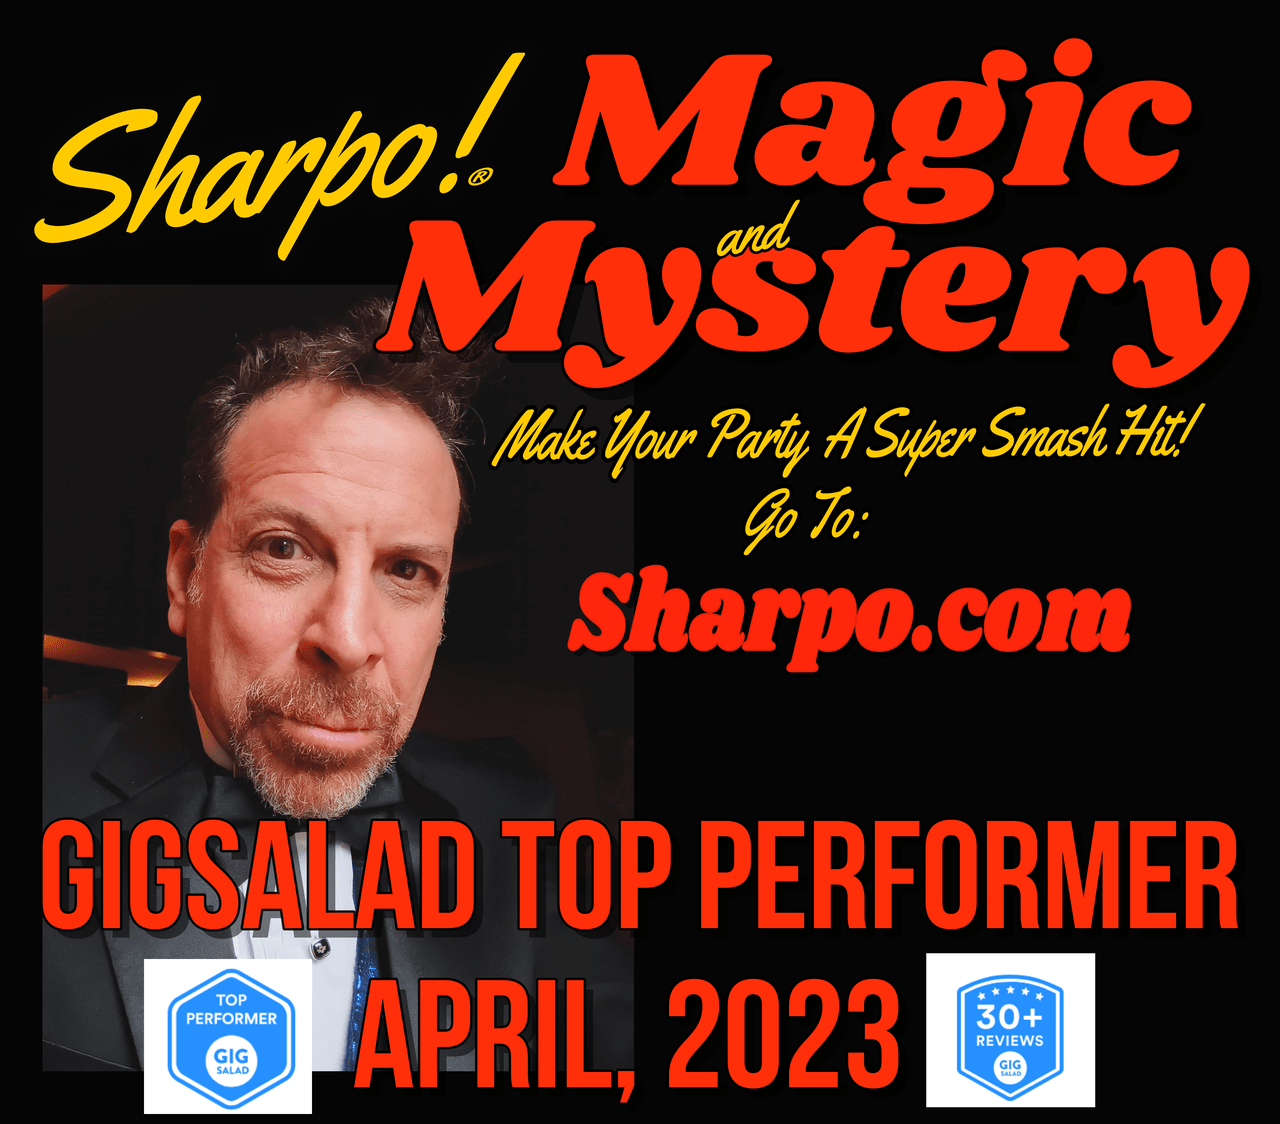 Made Top Performer Status again on Gig Salad for April, 2023.  Sharpo Magic and Mystery!